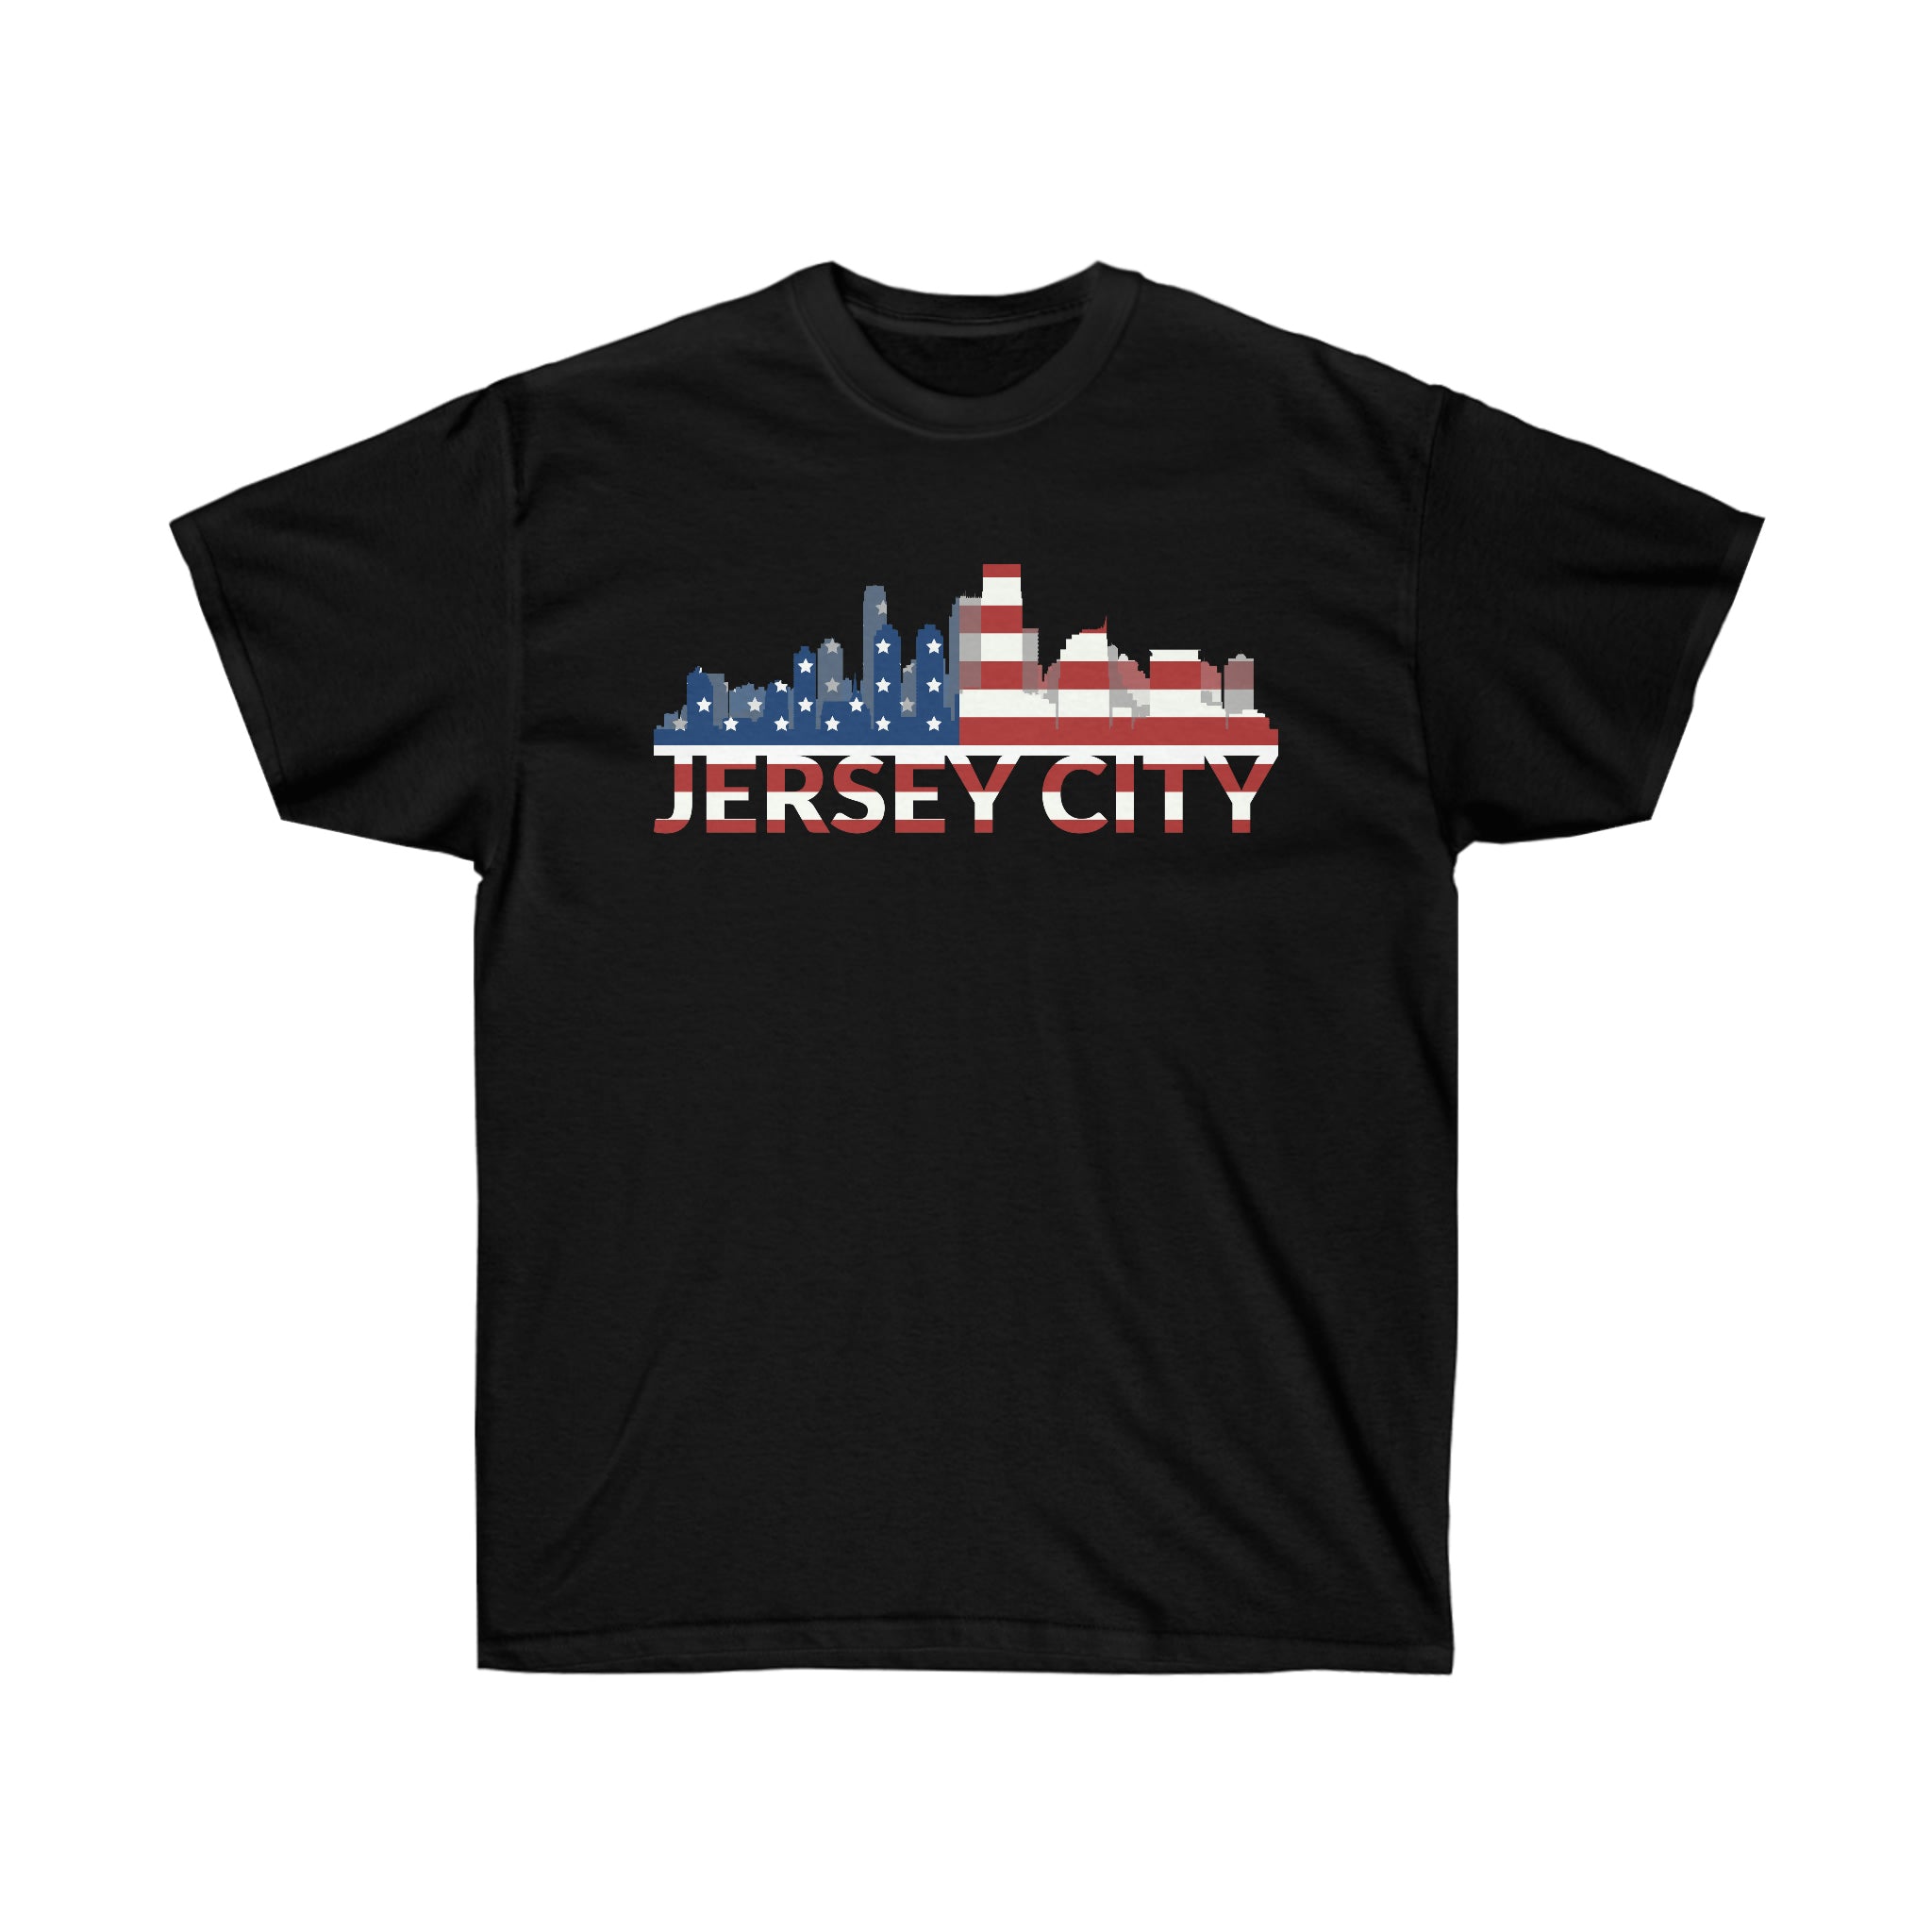 Unisex Ultra Cotton Tee "Higher Quality Materials"(JERSEY CITY)